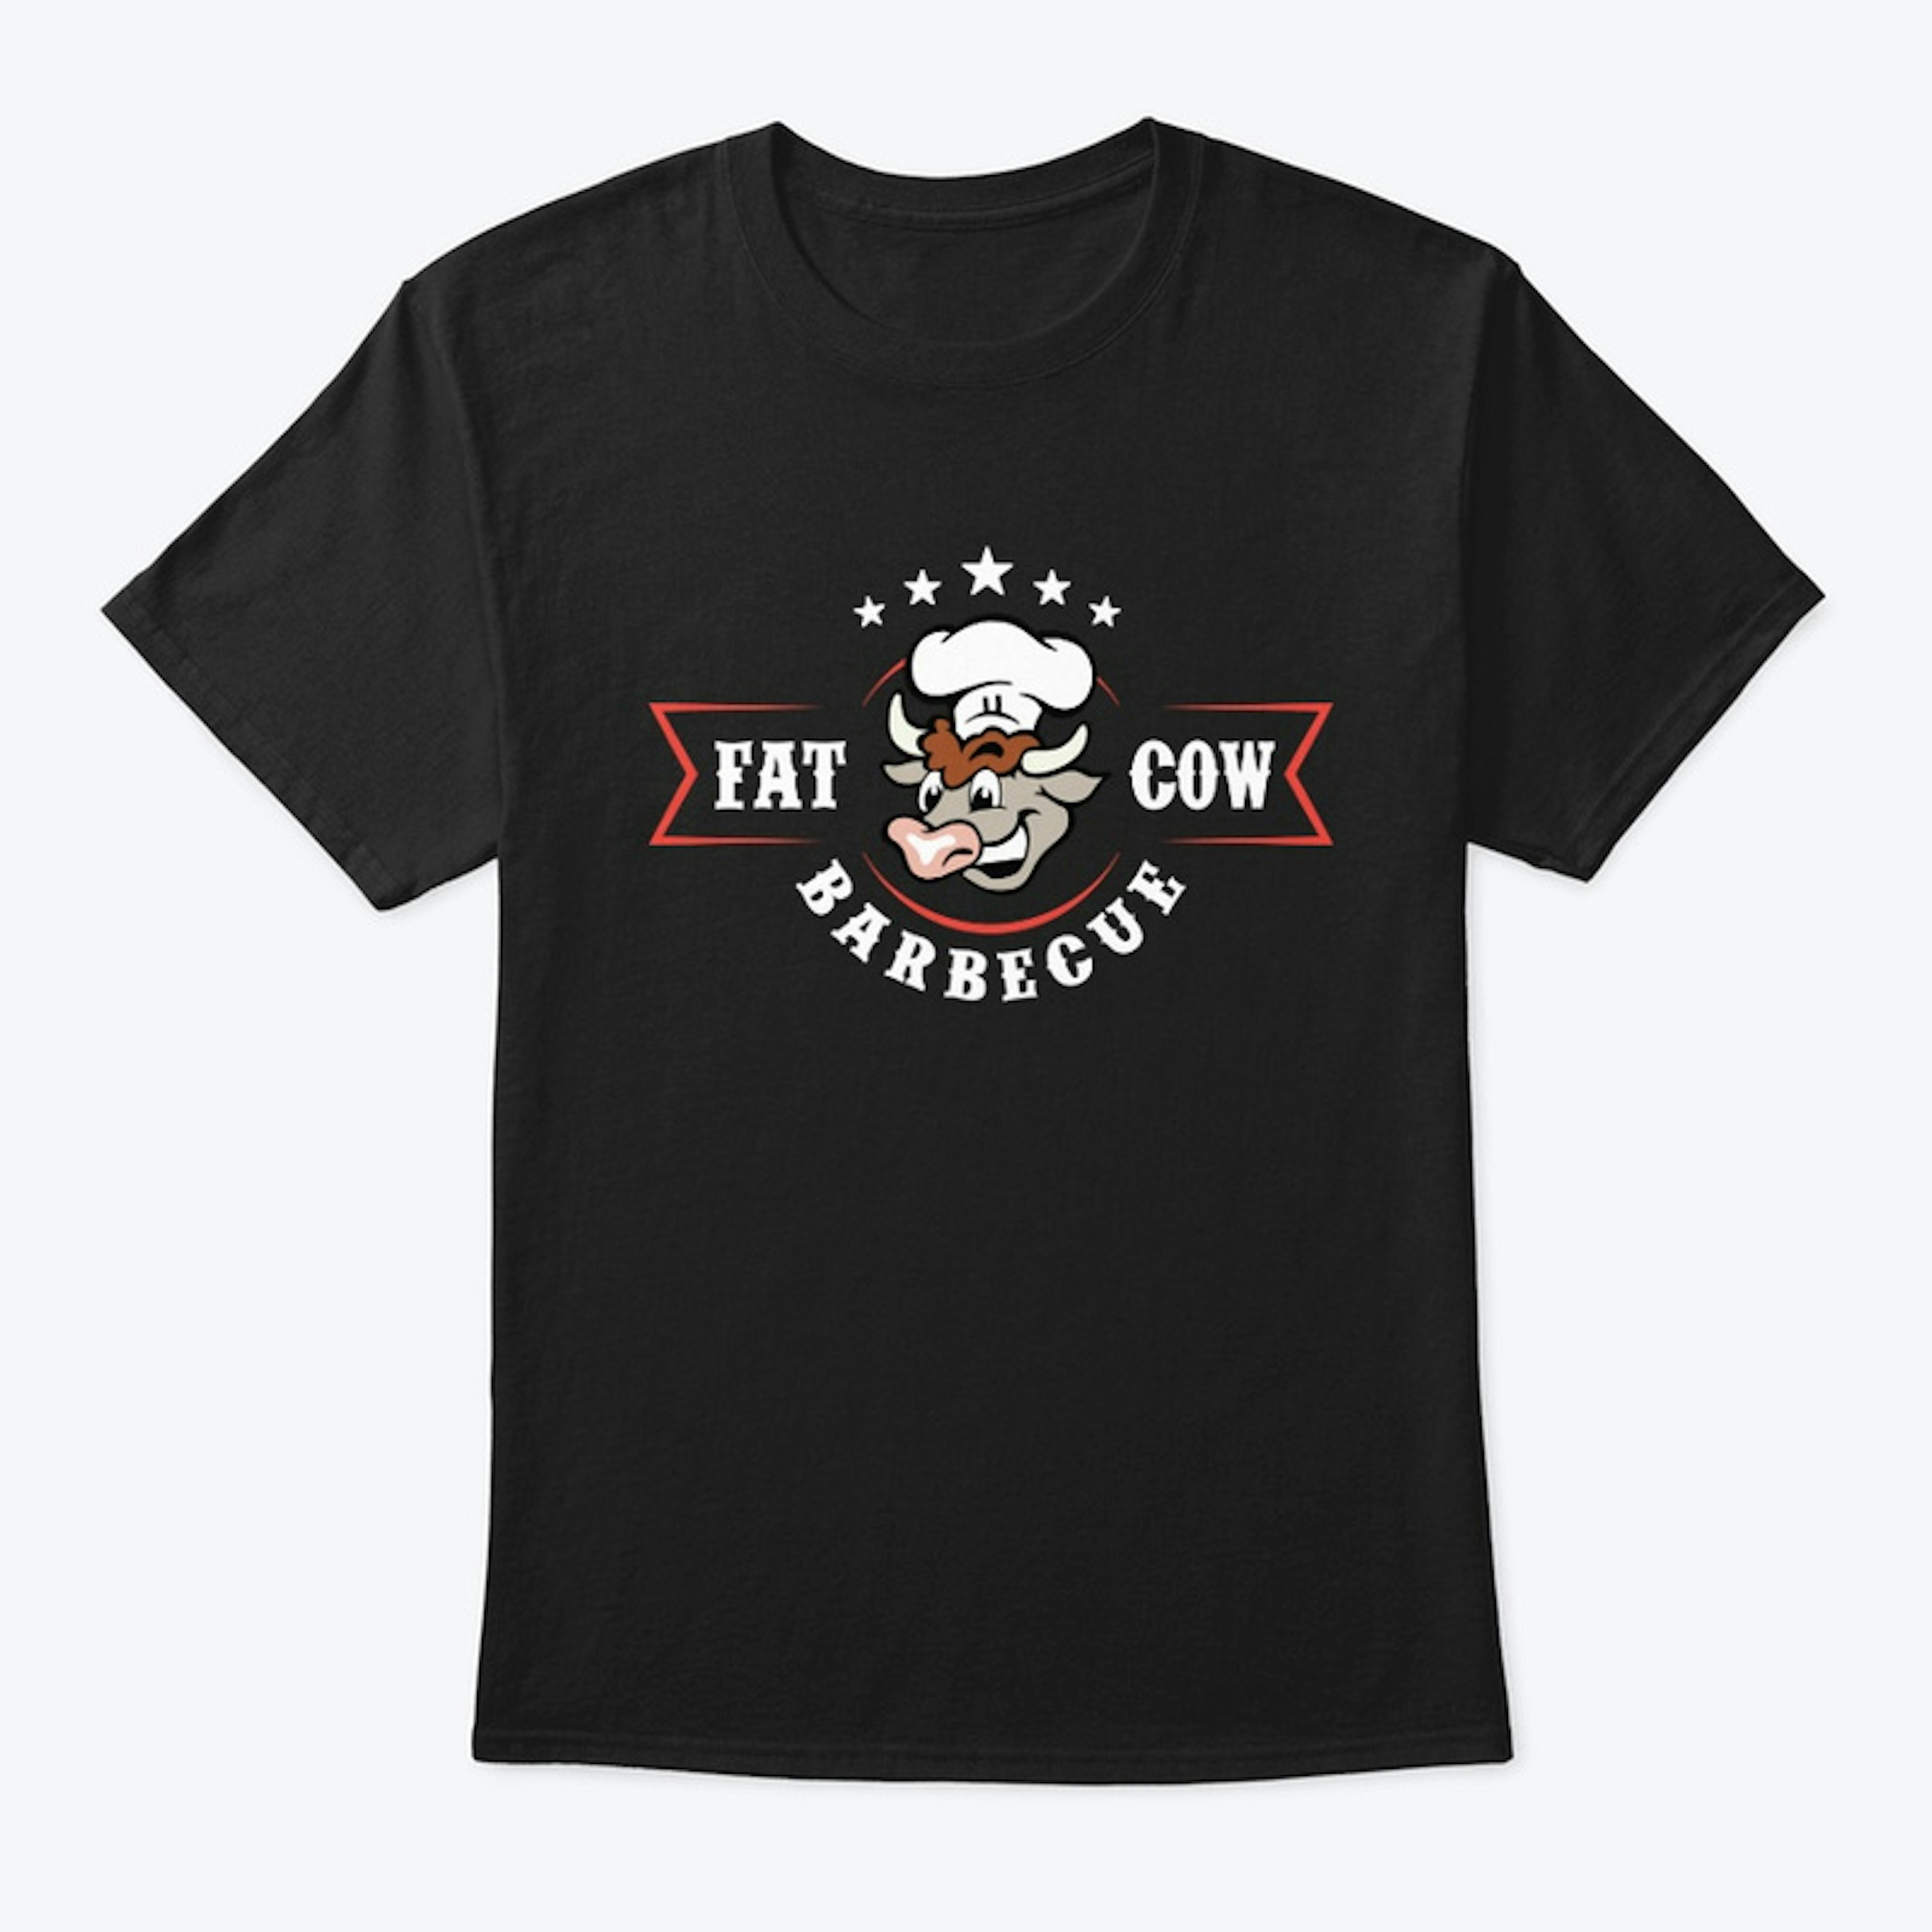 Fat Cow Barbecue Tee